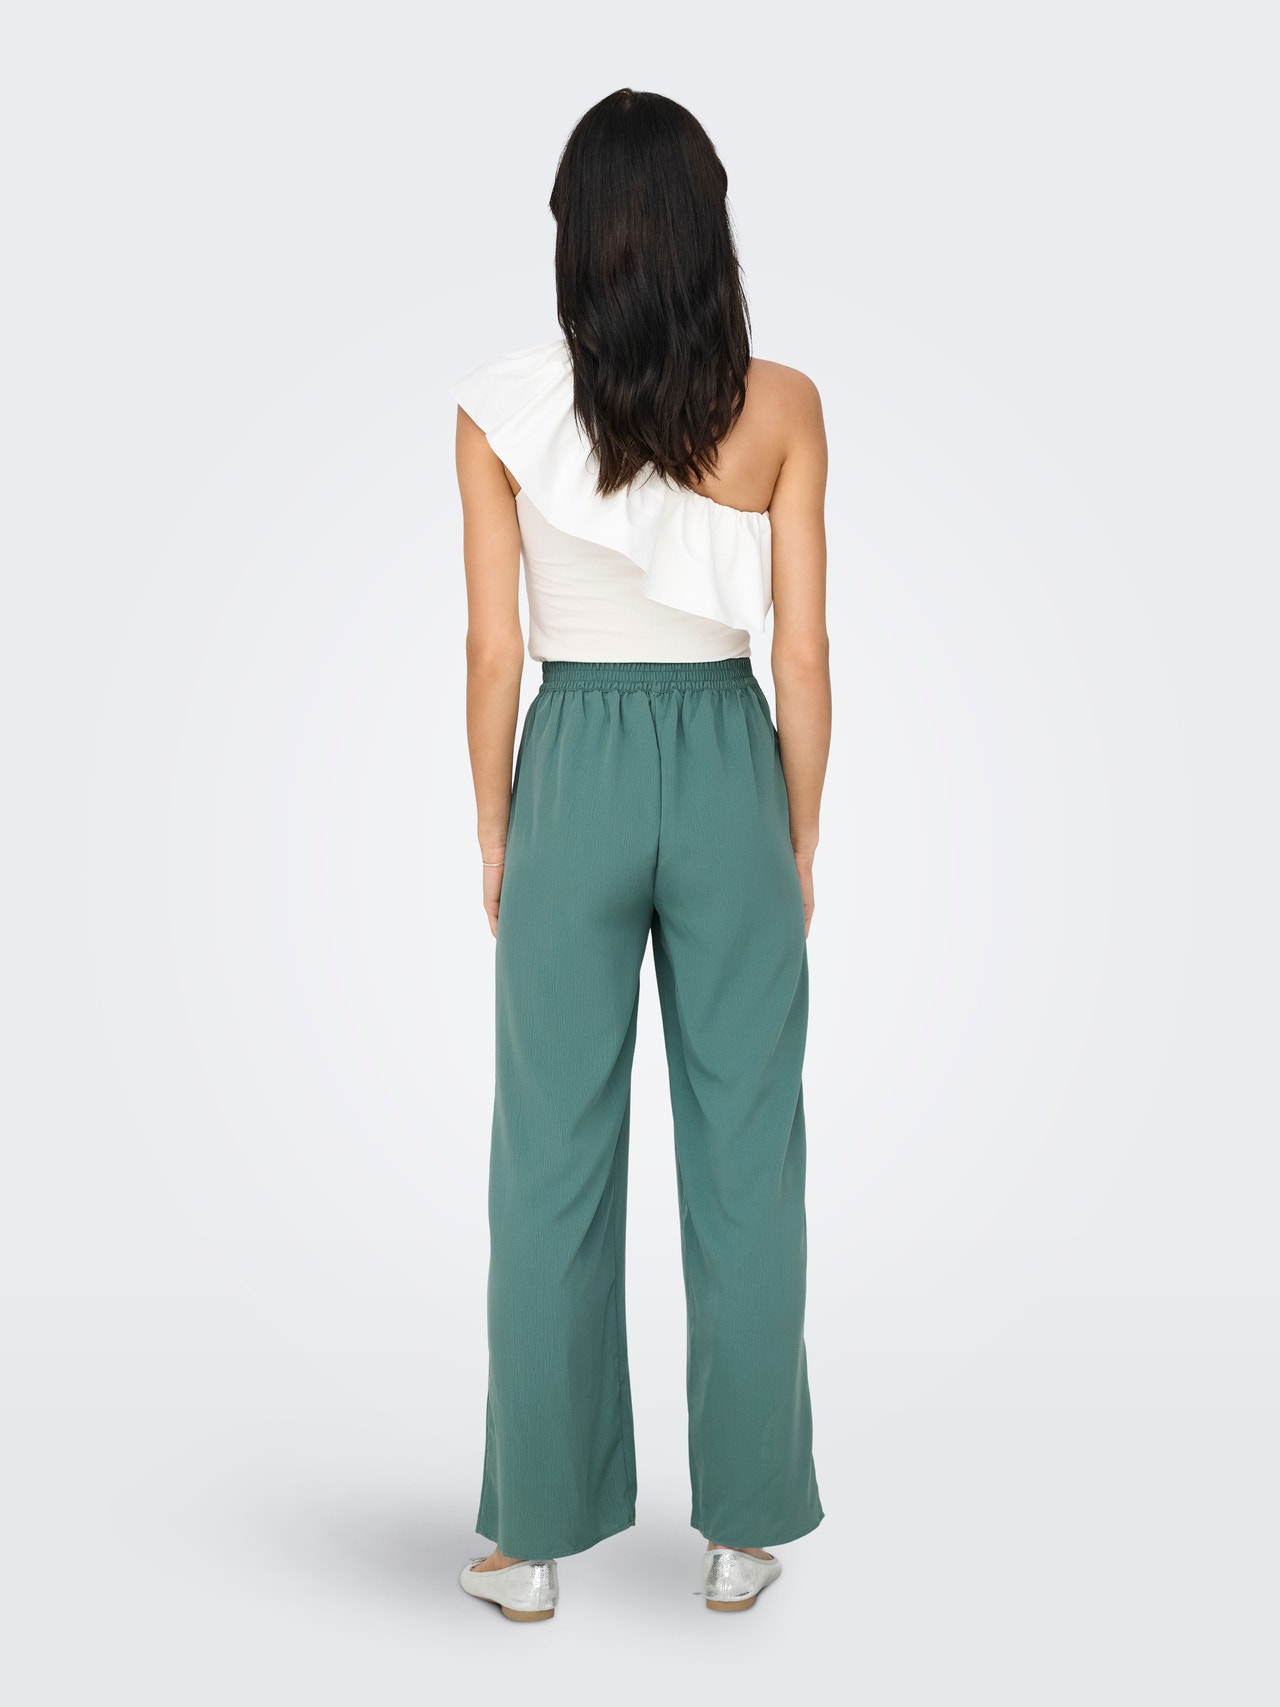 ONLY Regular Fit Trousers -Blue Spruce - 15335560